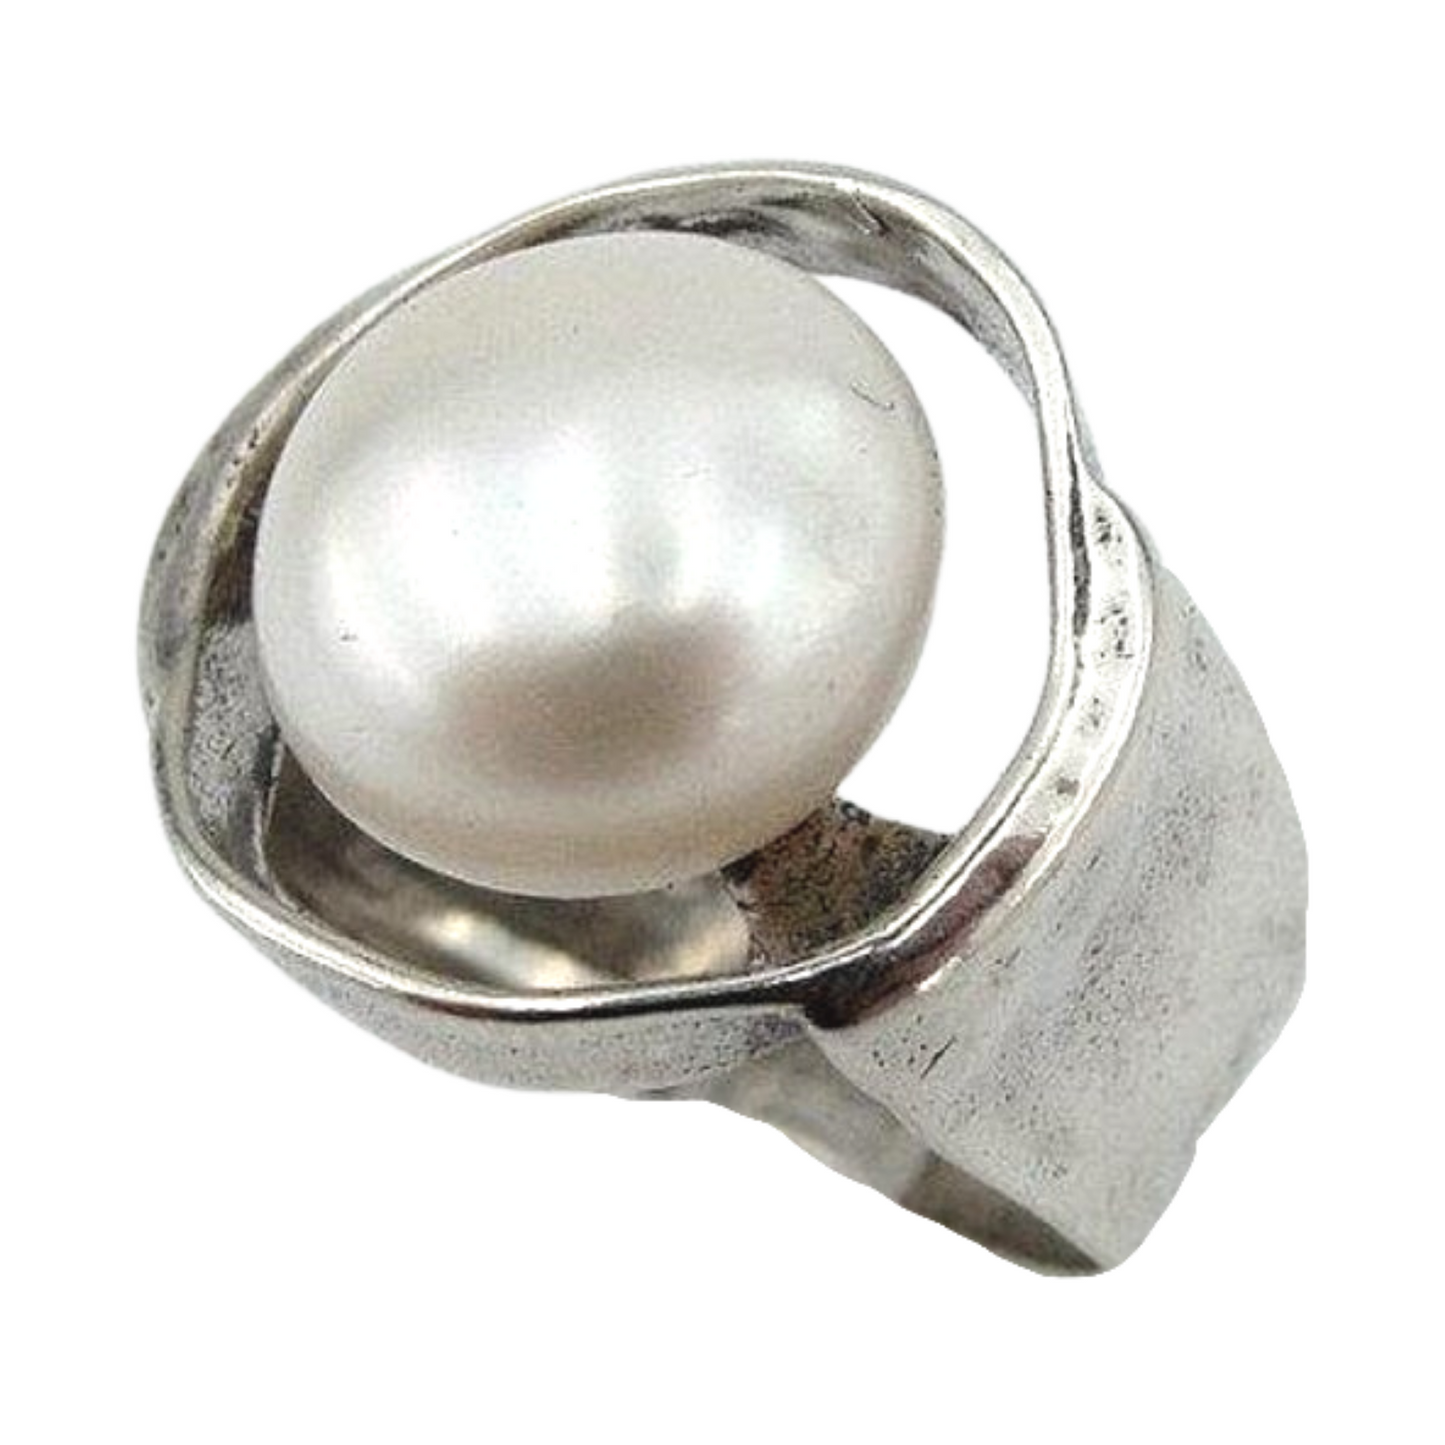 Solid sterling silver, and a Big round Natural White pearl gemstone.